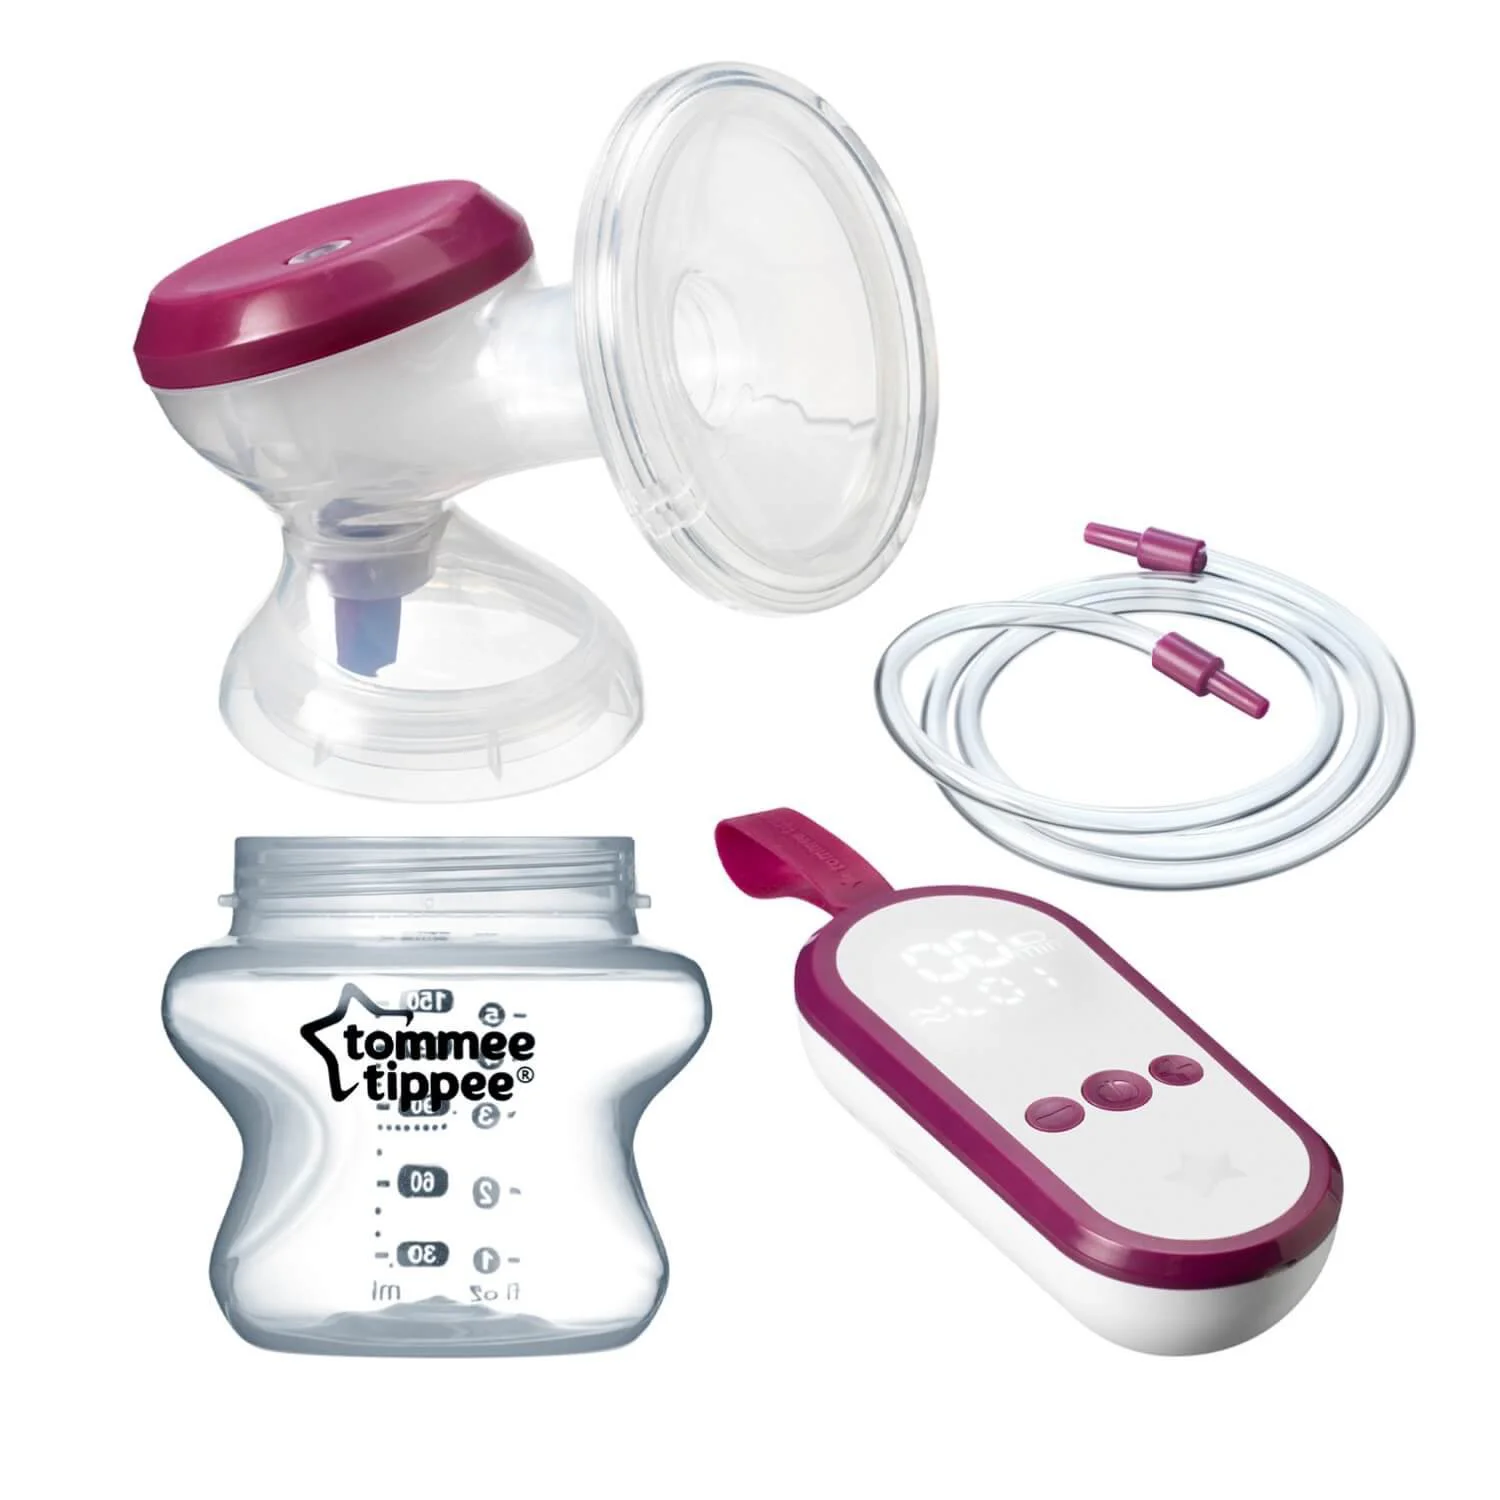 Pompa de san electrica Tommee Tippee Made for Me